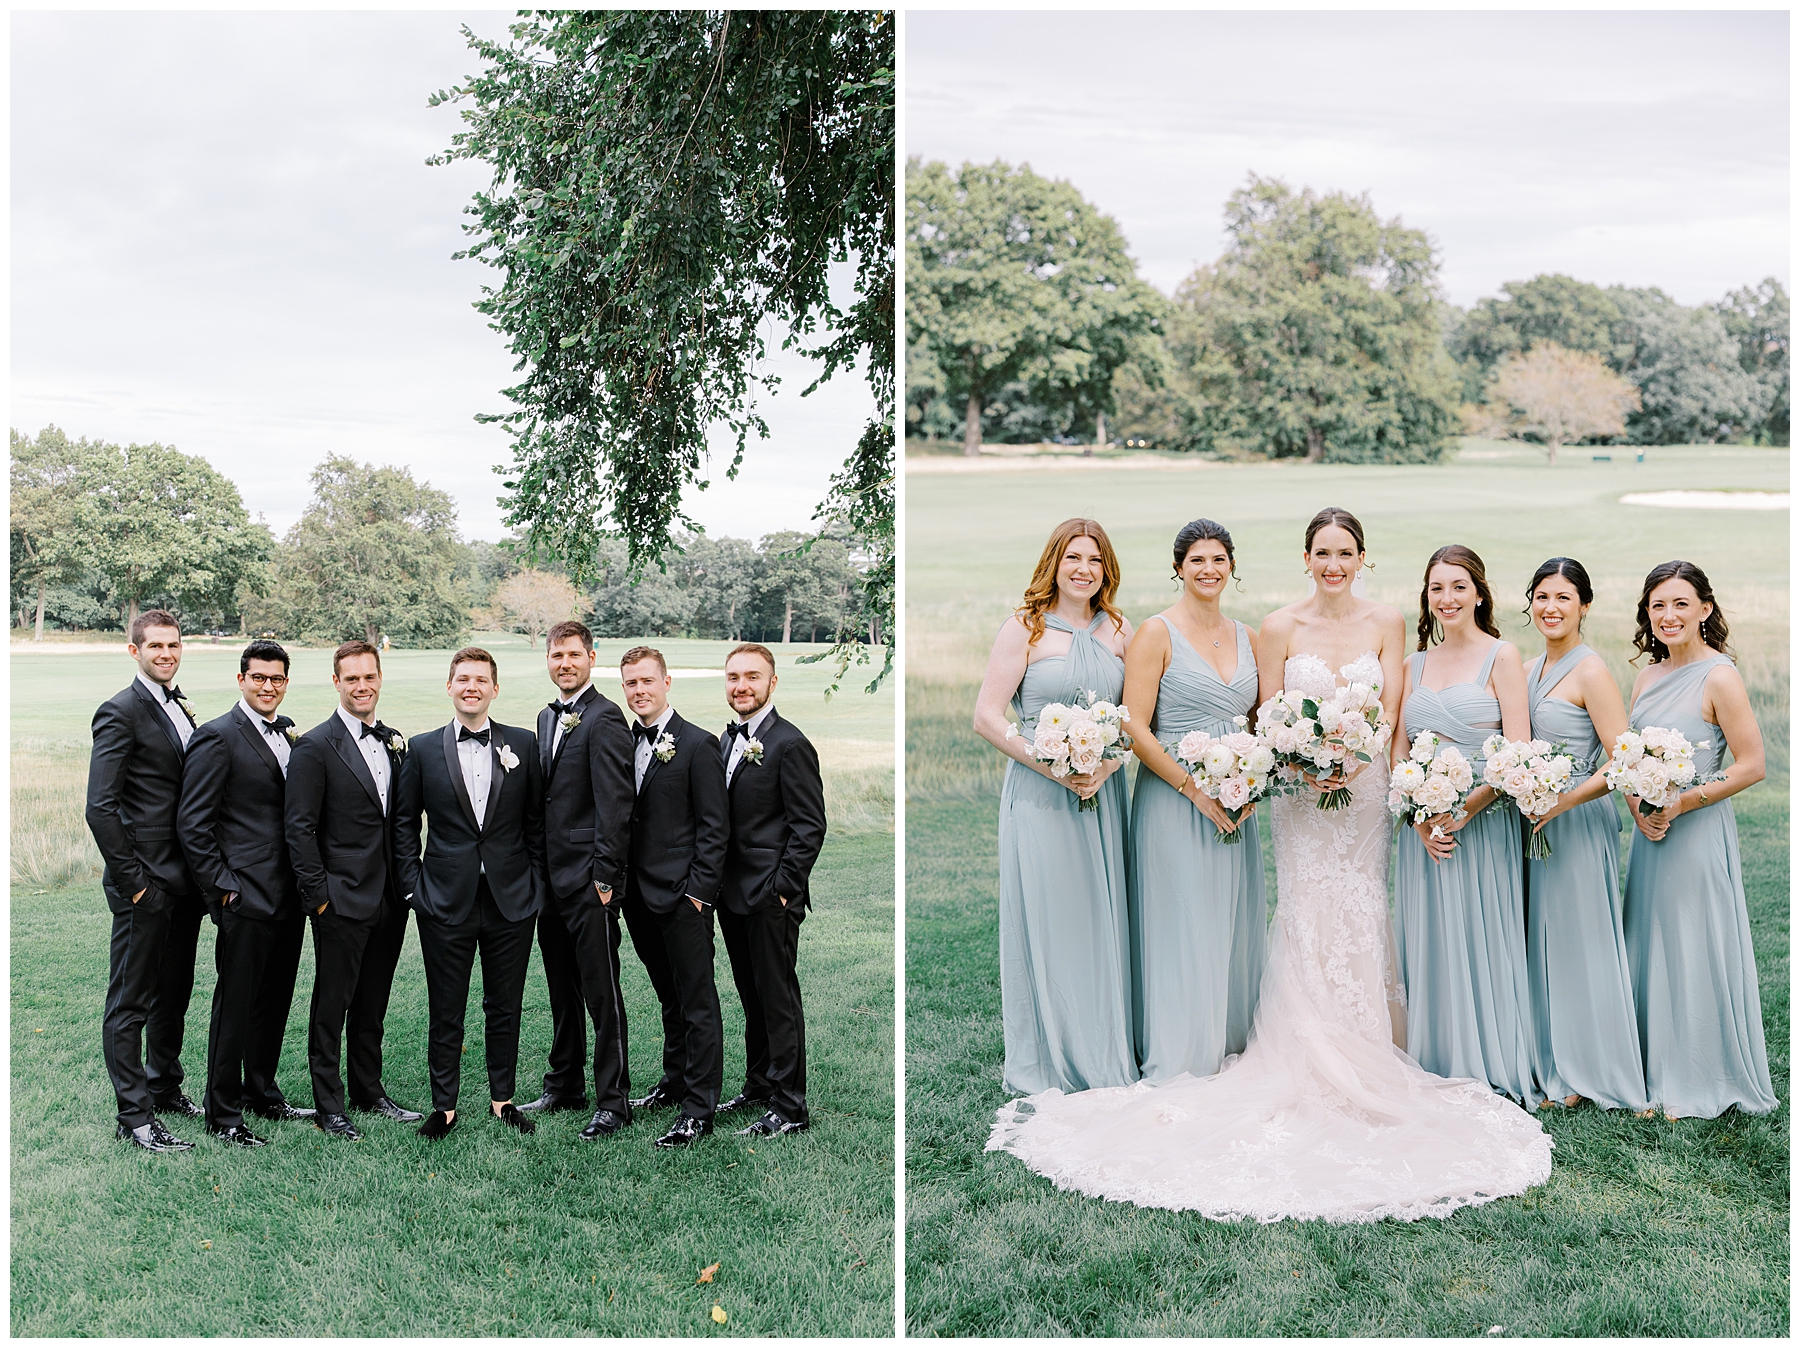 wedding party portraits from romantic floral centered wedding at The Country Club in Brookline, MA